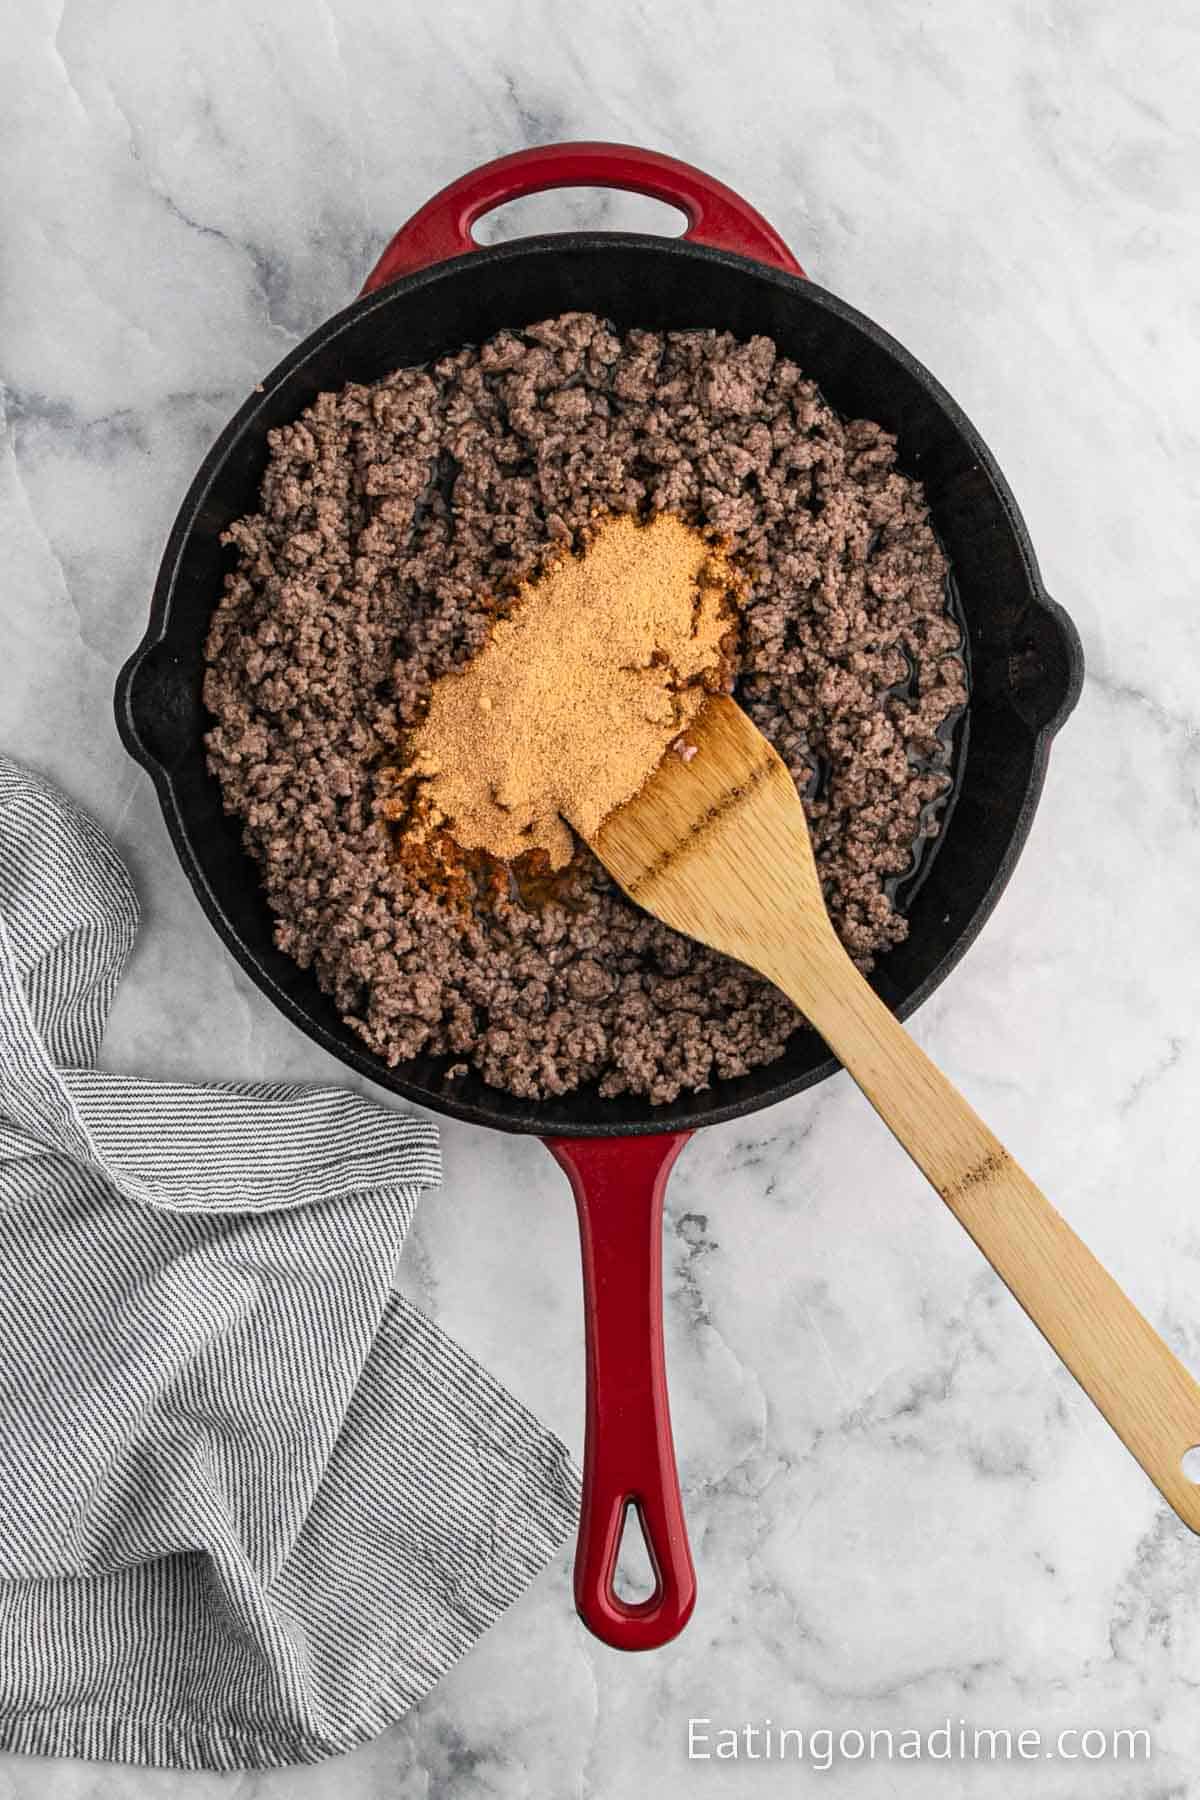 Mixing in the taco seasoning into the ground beef in the skillet